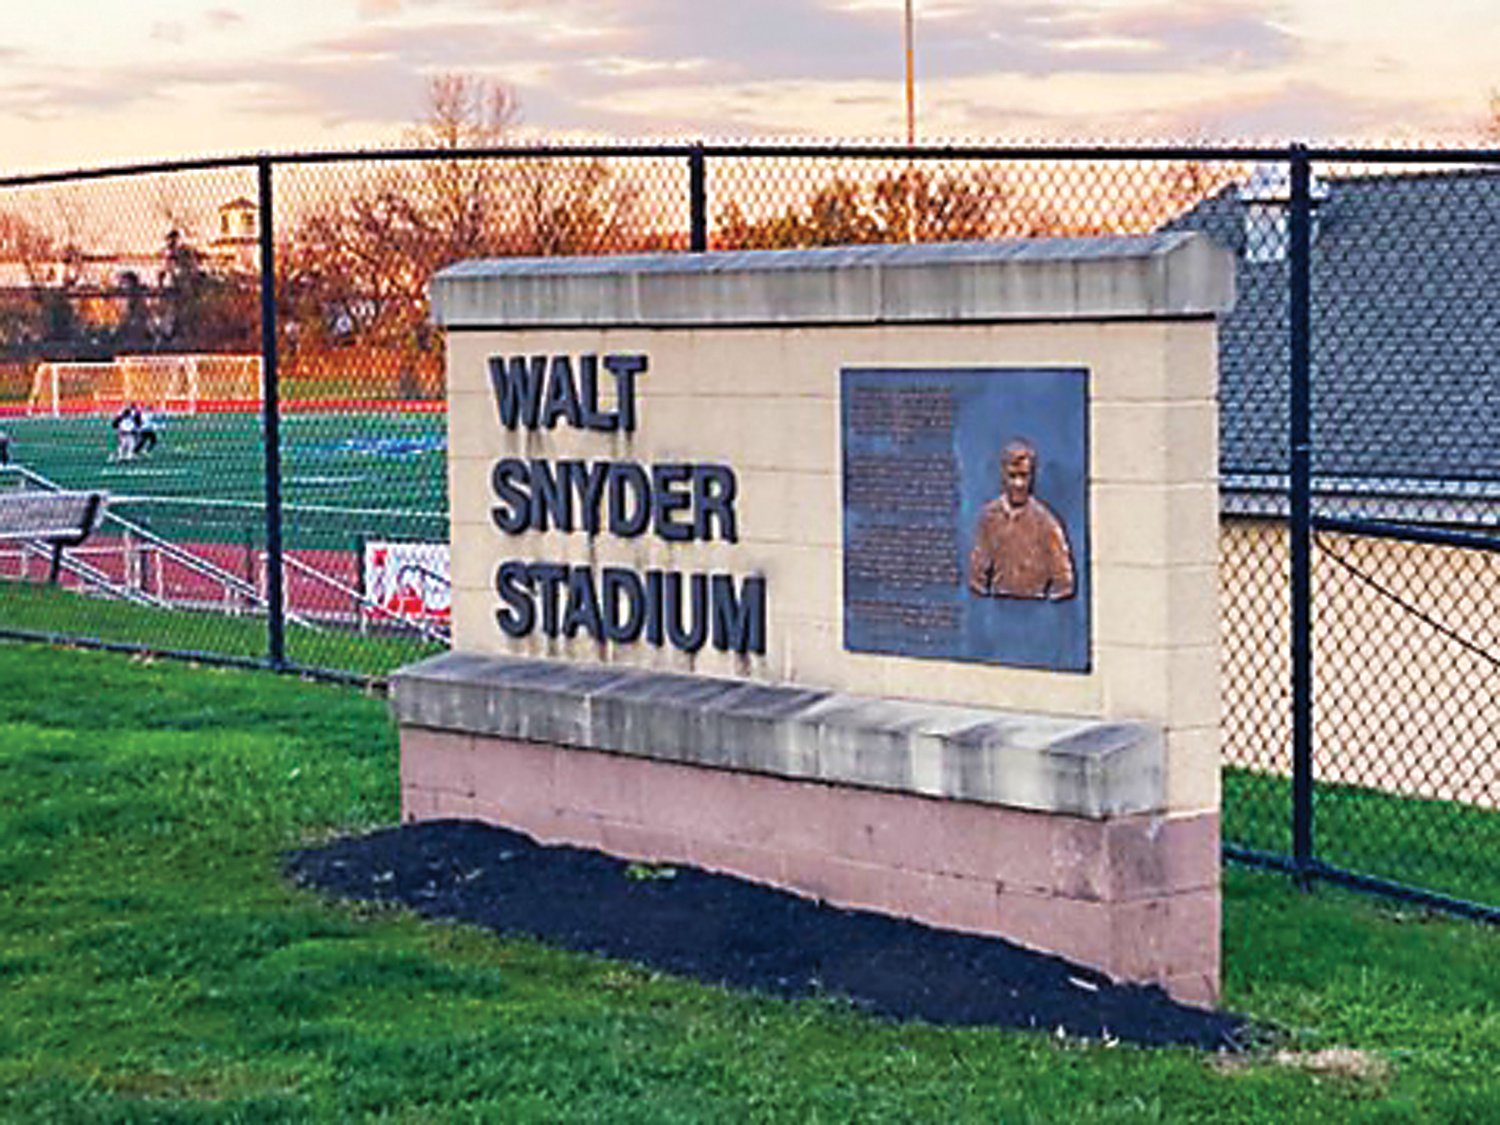 CHRIS ENGLISH
Repairs and coating at Walt Snyder Stadium at Council Rock High School North in Newtown Township are among $8.8 million in capital improvements approved for the school district next school year.